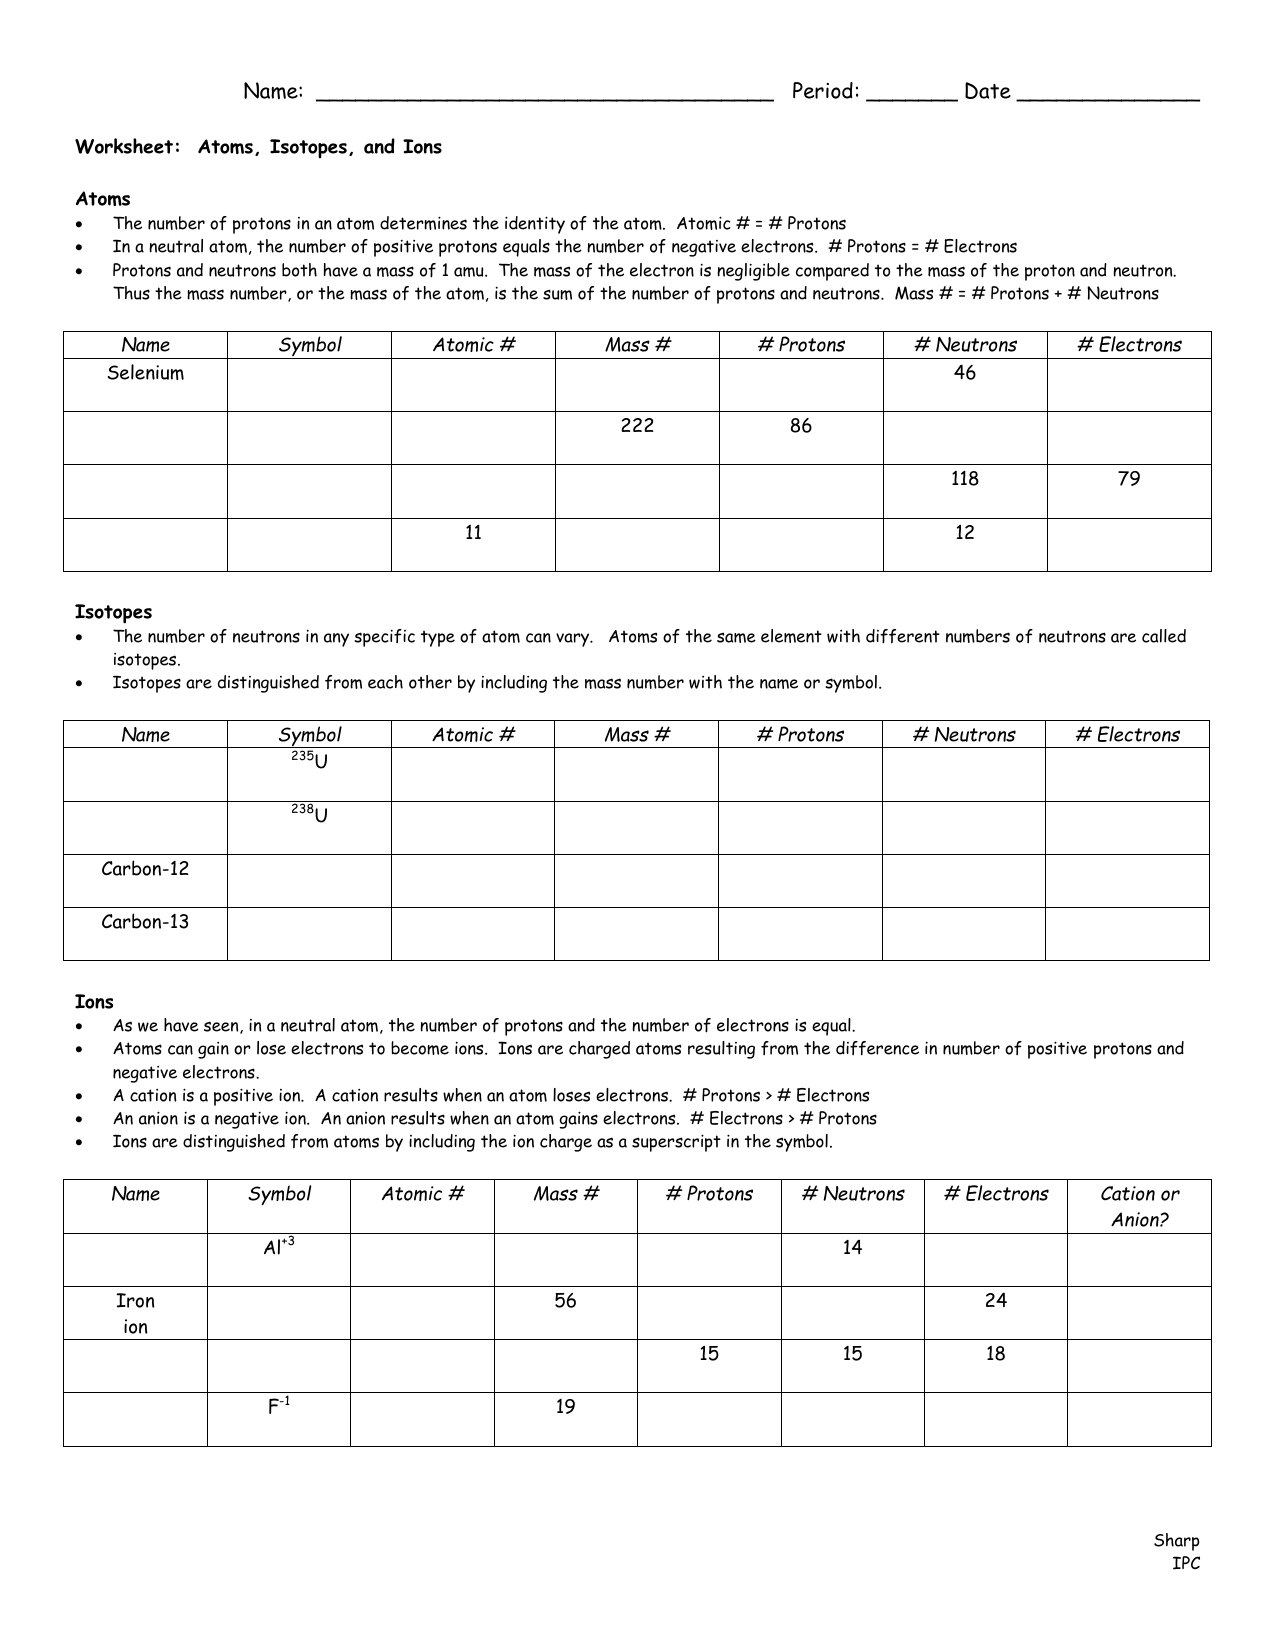 Atoms, Isotopes, & Ions Worksheet With Isotopes Worksheet Answer Key